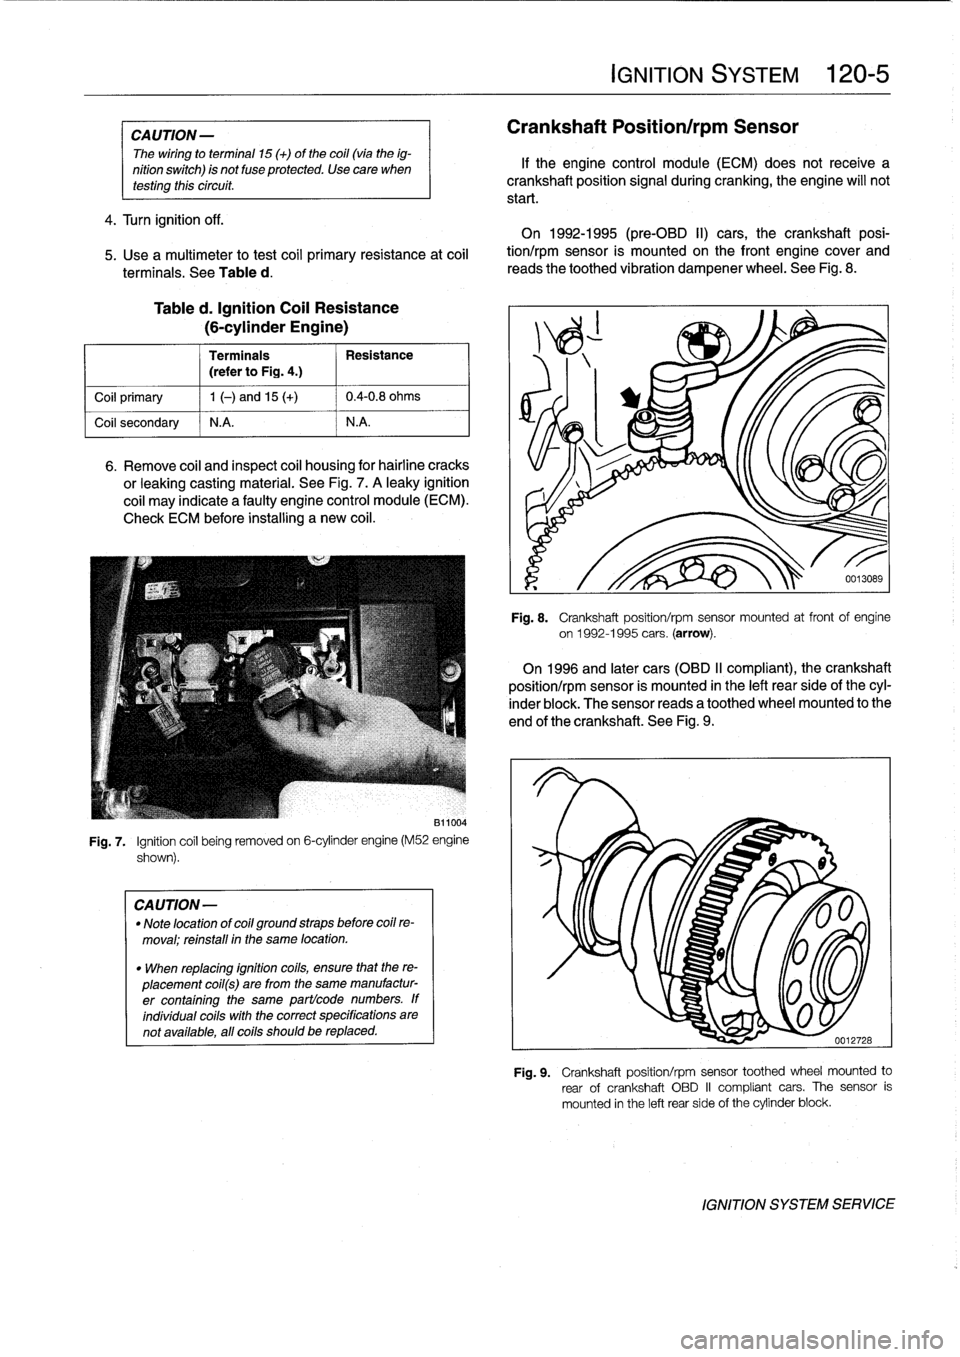 BMW 318i 1992 E36 Workshop Manual 
CAUTION
-

The
wiring
to
termina¡
15
(+)
of
the
coil(vía
the
ig-

nition
switch)
is
not
fuse
protected
.
Use
care
when
testíng
thiscircuit
.

4
.
Turn
ignition
off
.

5
.
Use
a
multimeter
to
test
